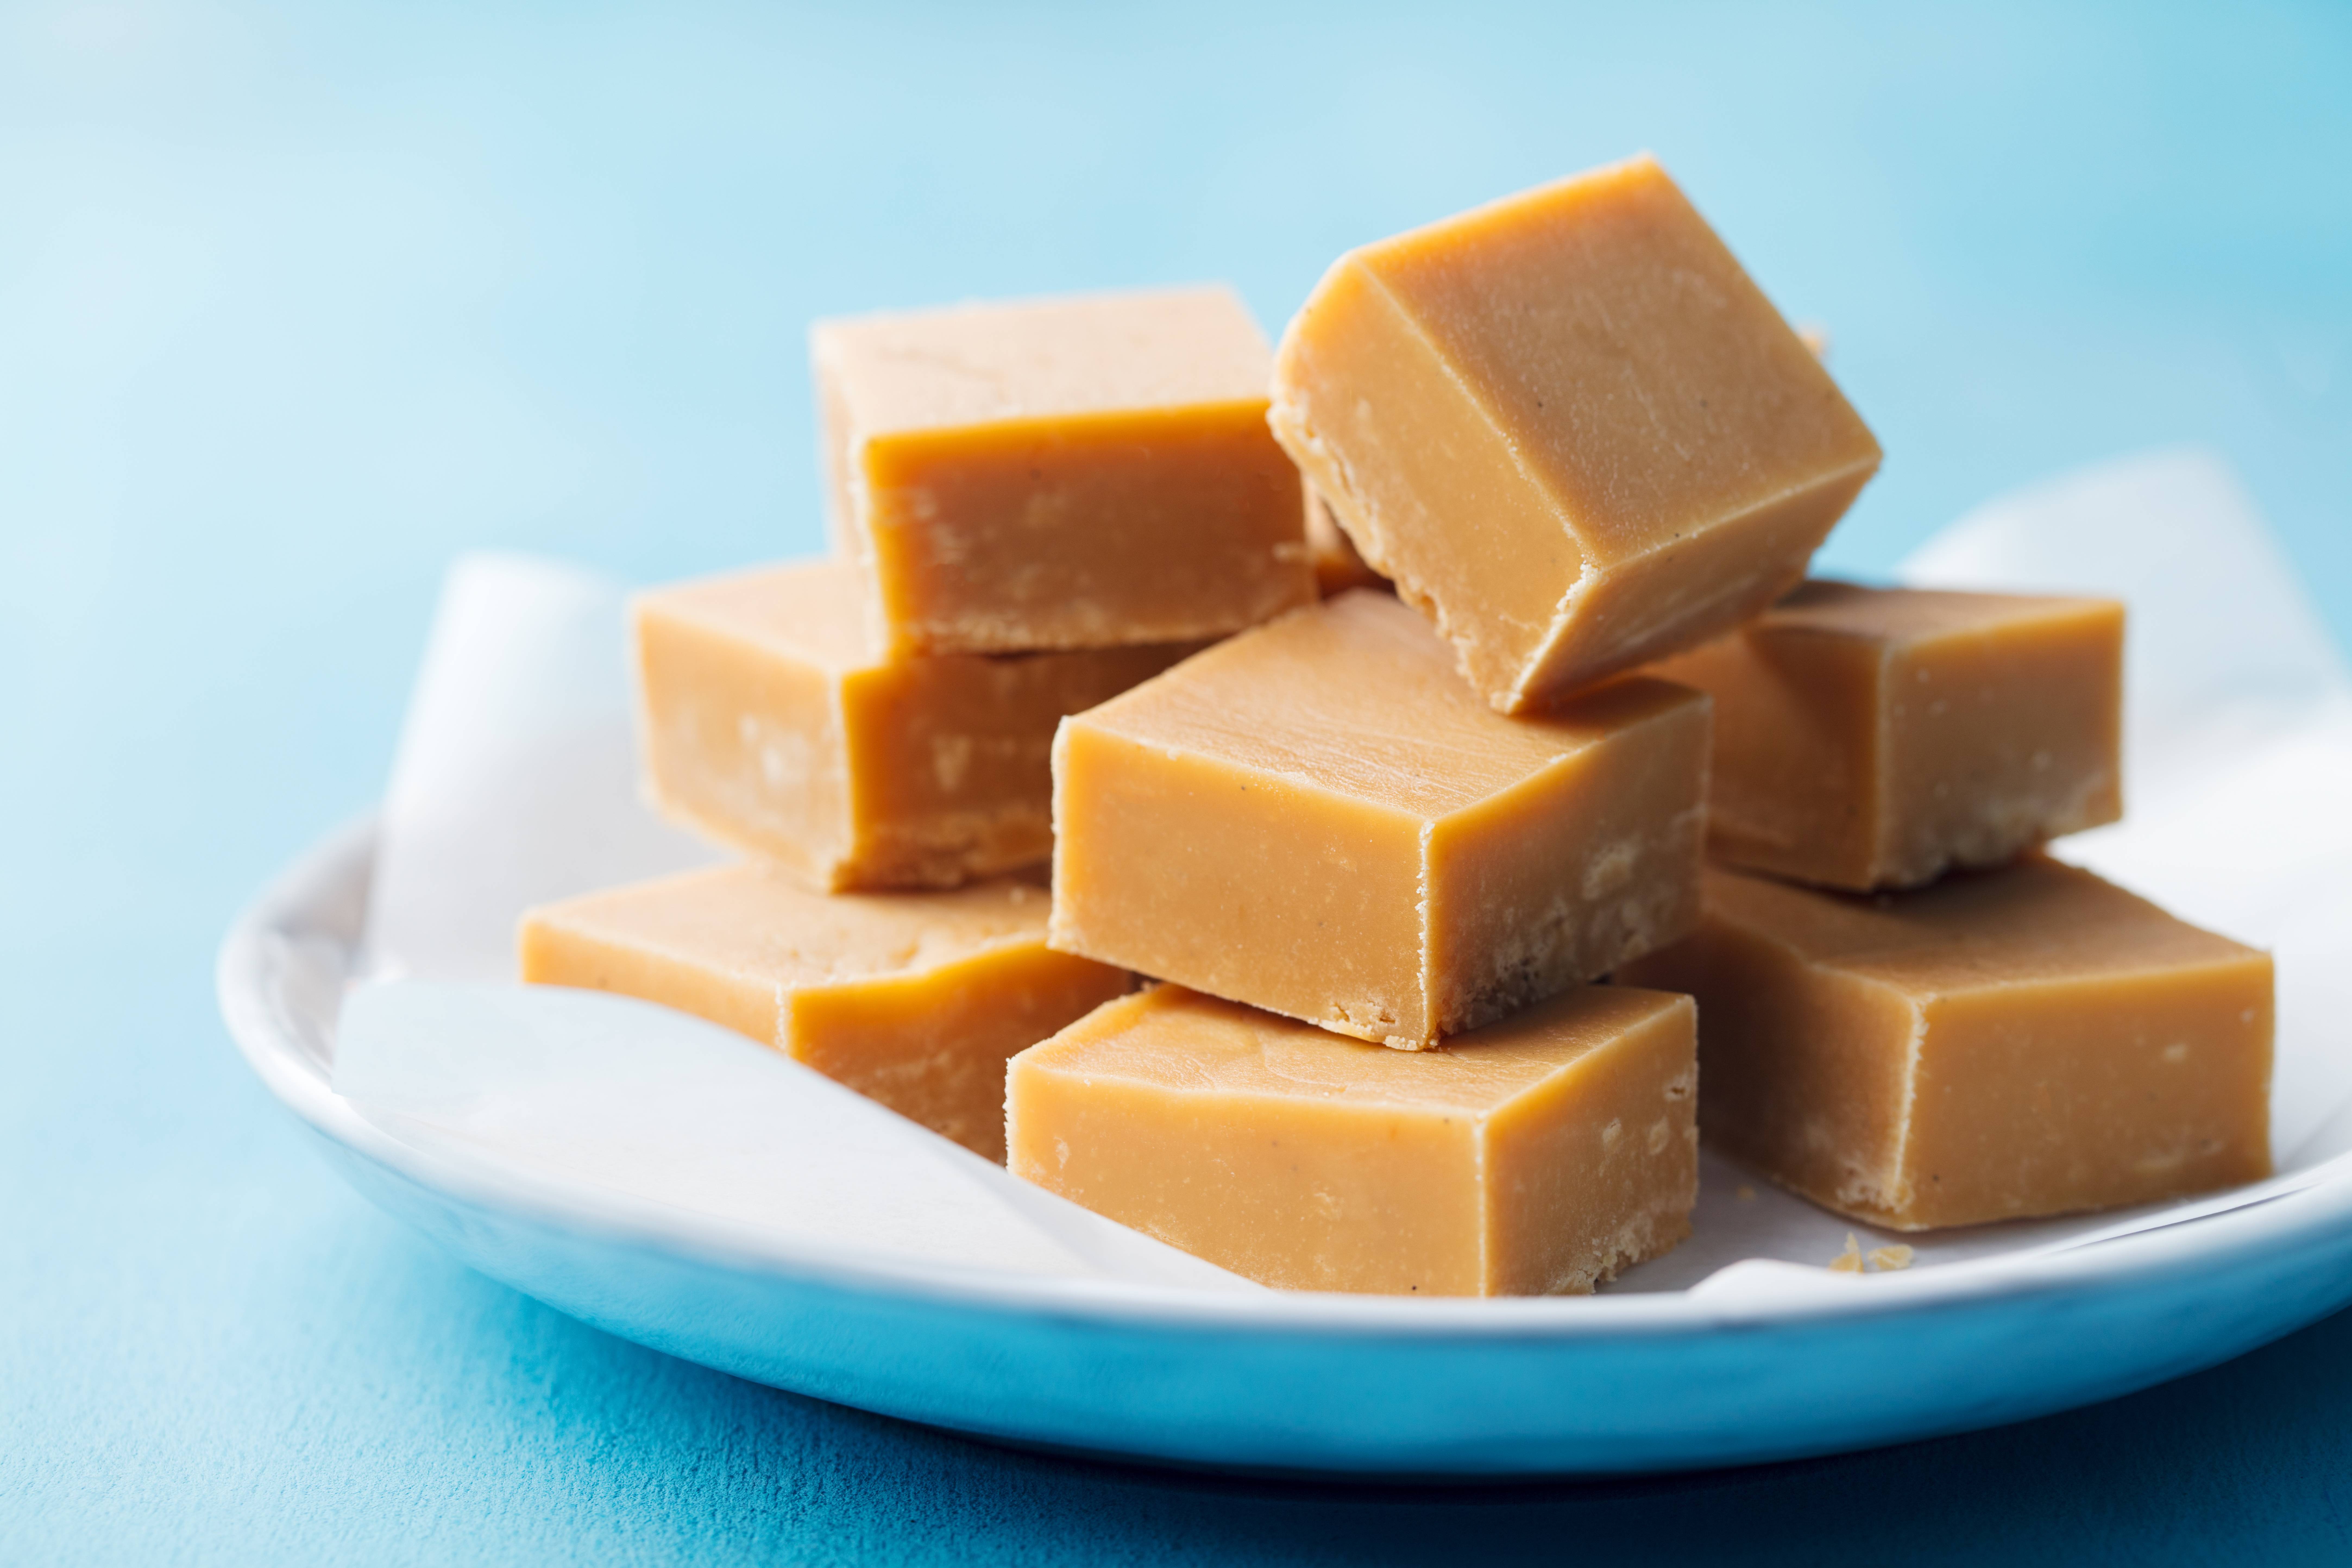 Five Minute Microwave Fudge Recipe (Video) - Life Should Cost Less